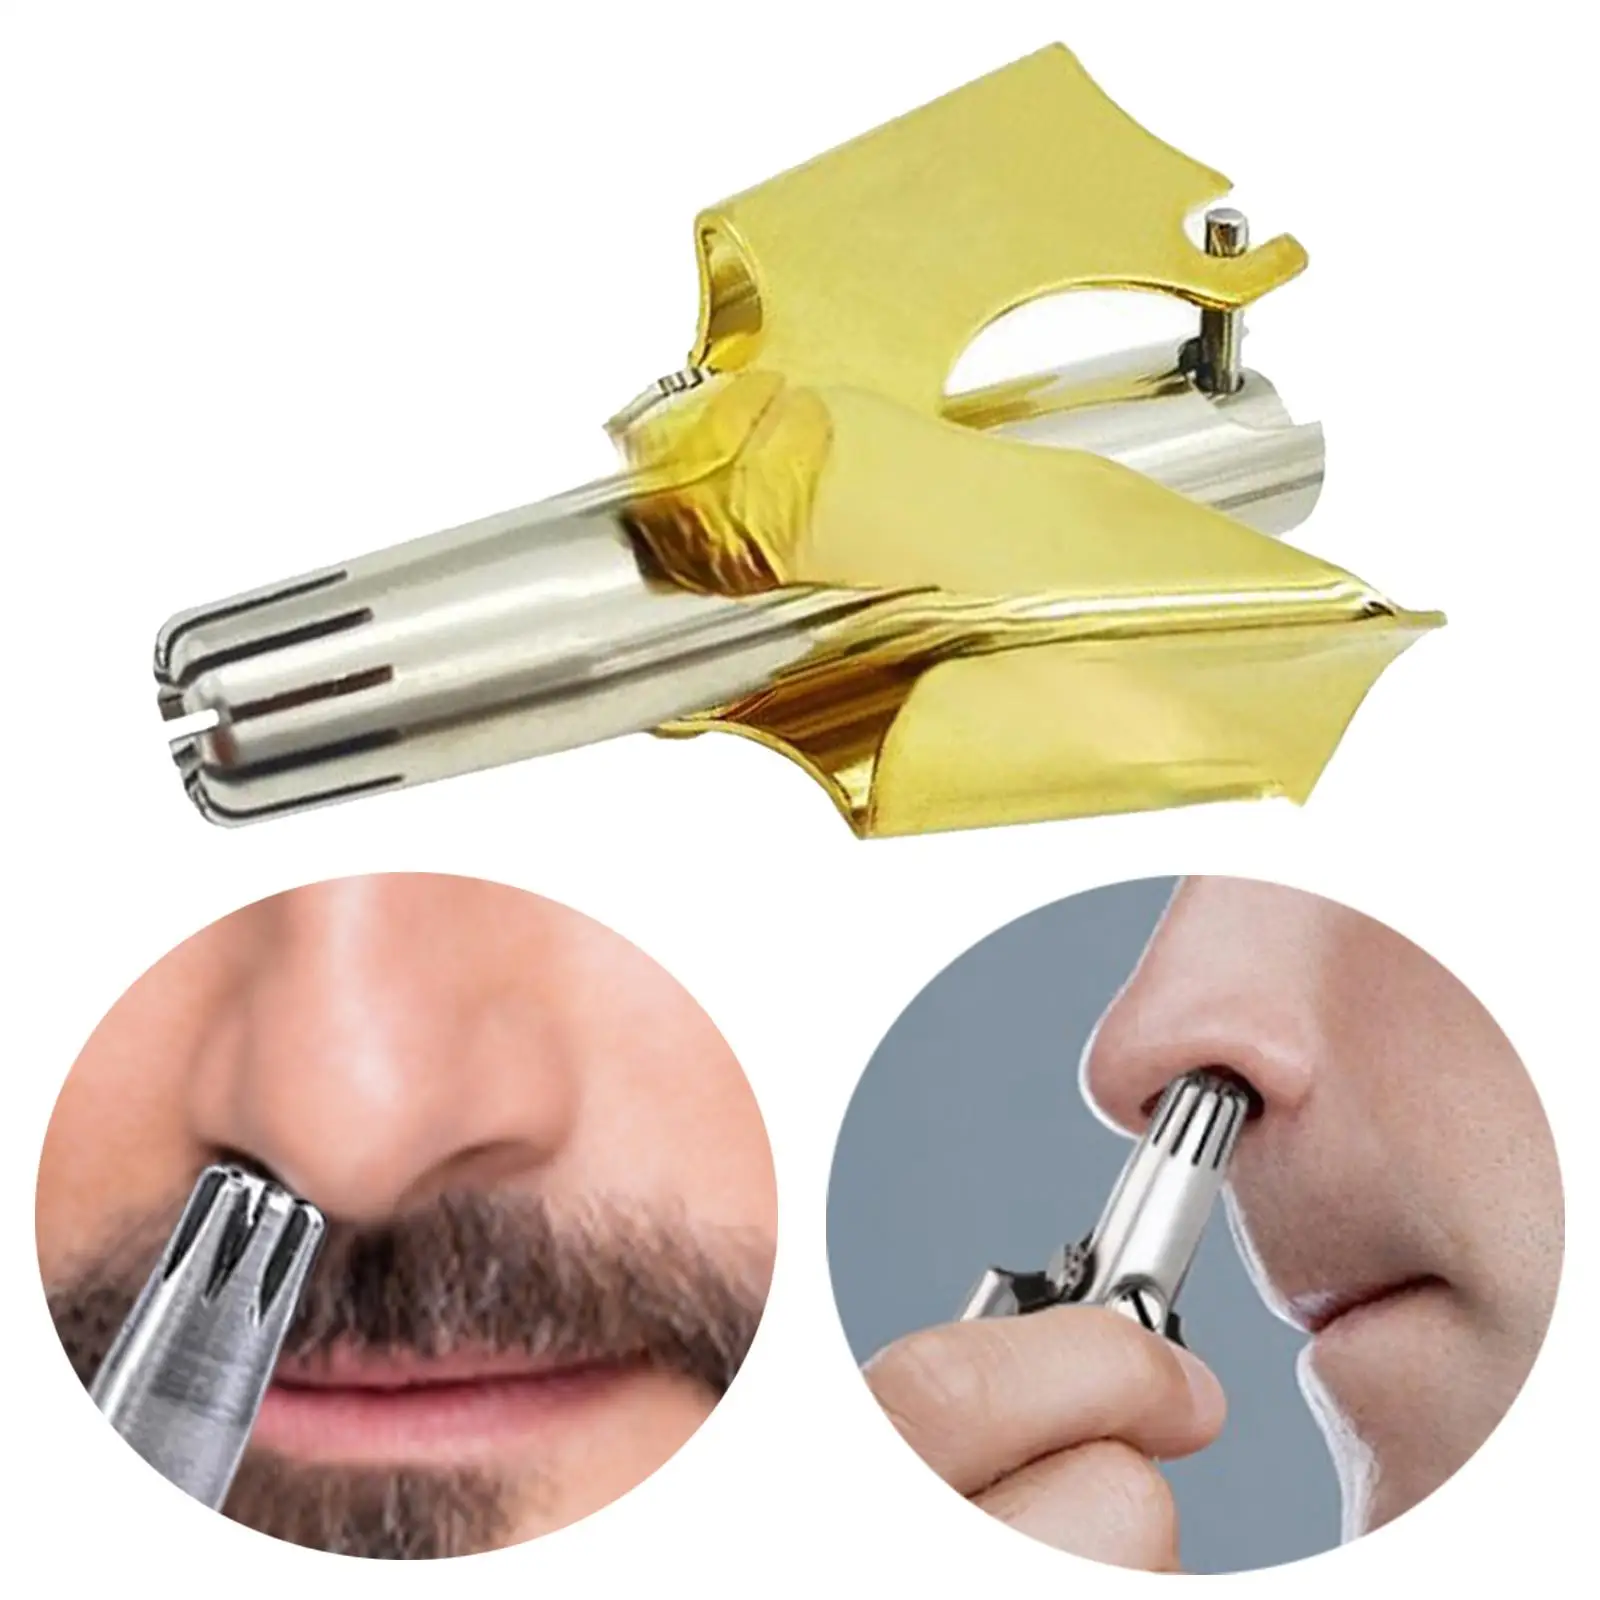 Professional Manual Nose Trimmer Washable Portable Mini Razor Nasal Shaver No Battery for Men Women Gift Ear Hair Cutter Gold